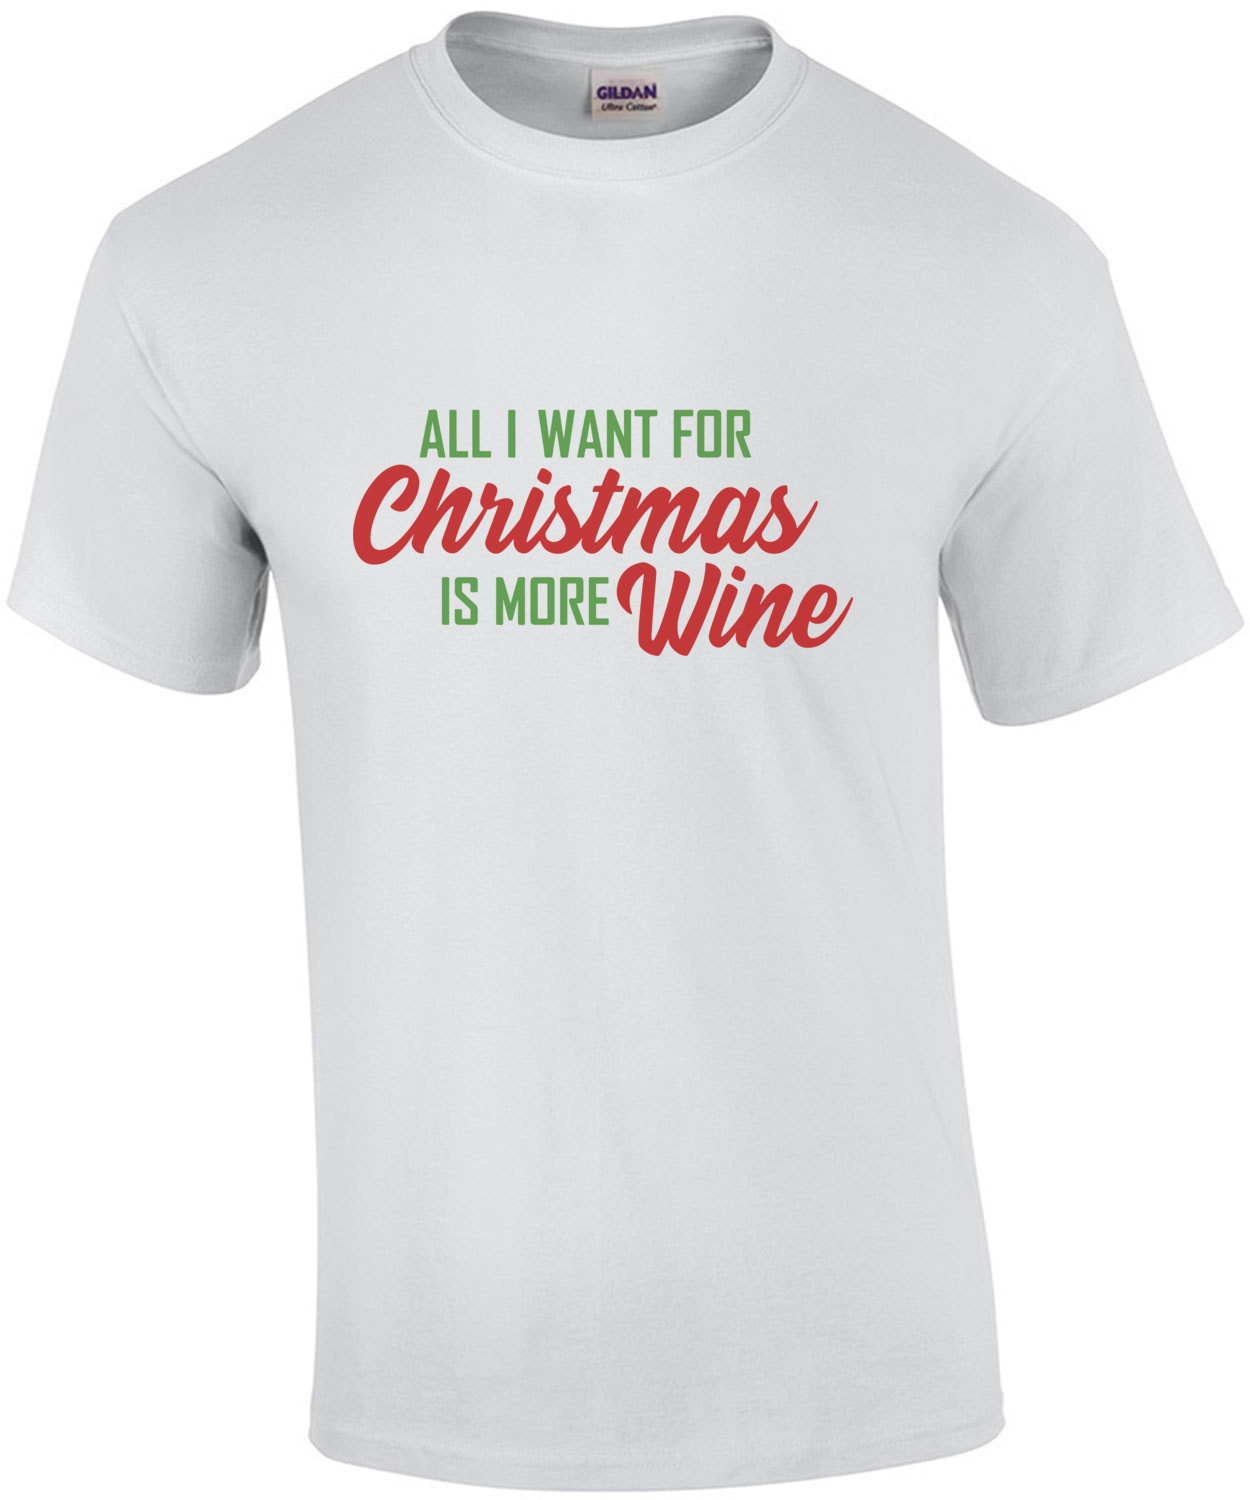 All I want for Christmas is more wine - Christmas T-shirt